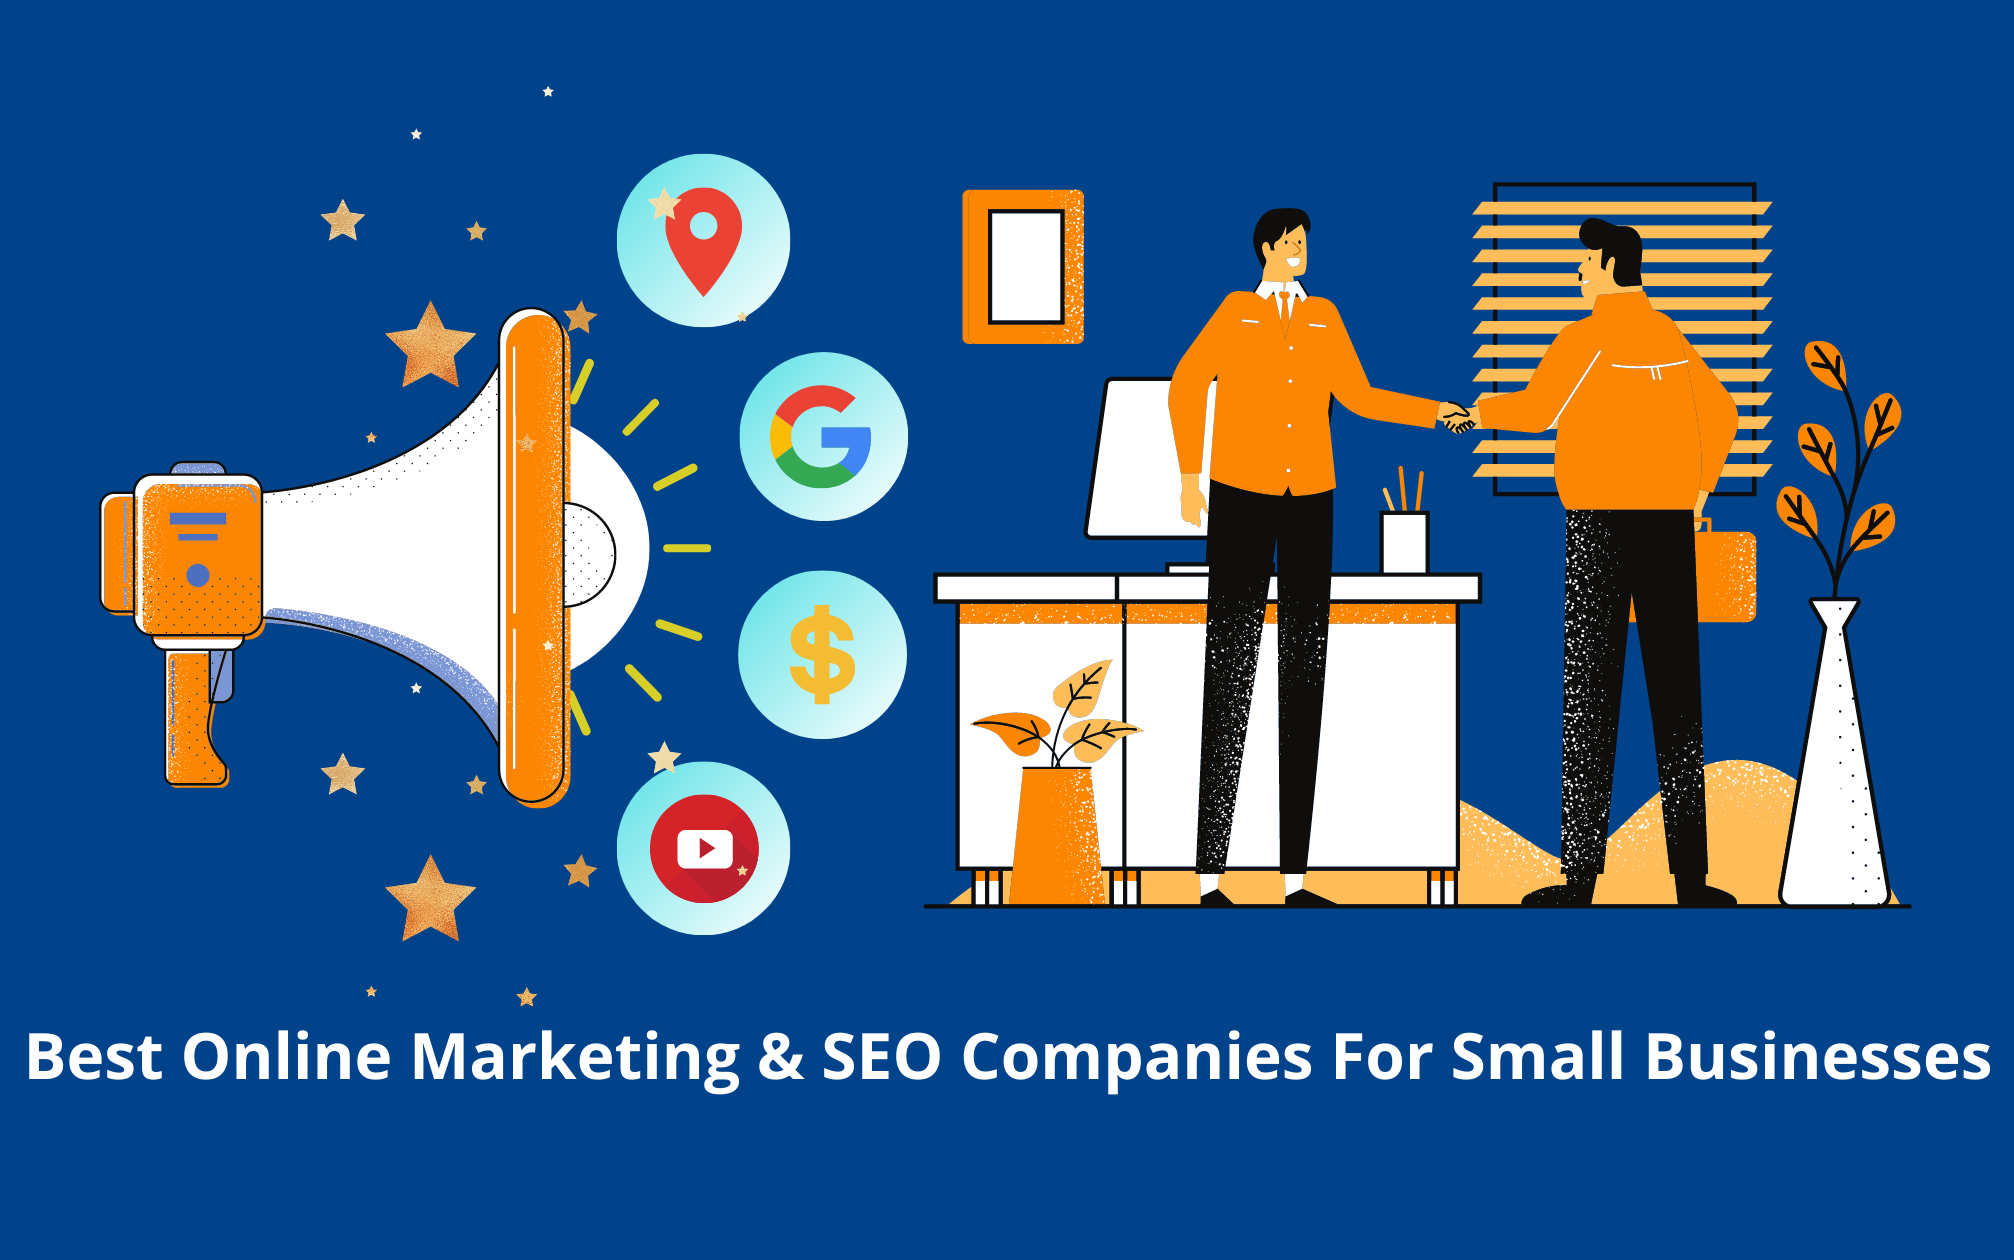 SEO Companies For Small Business